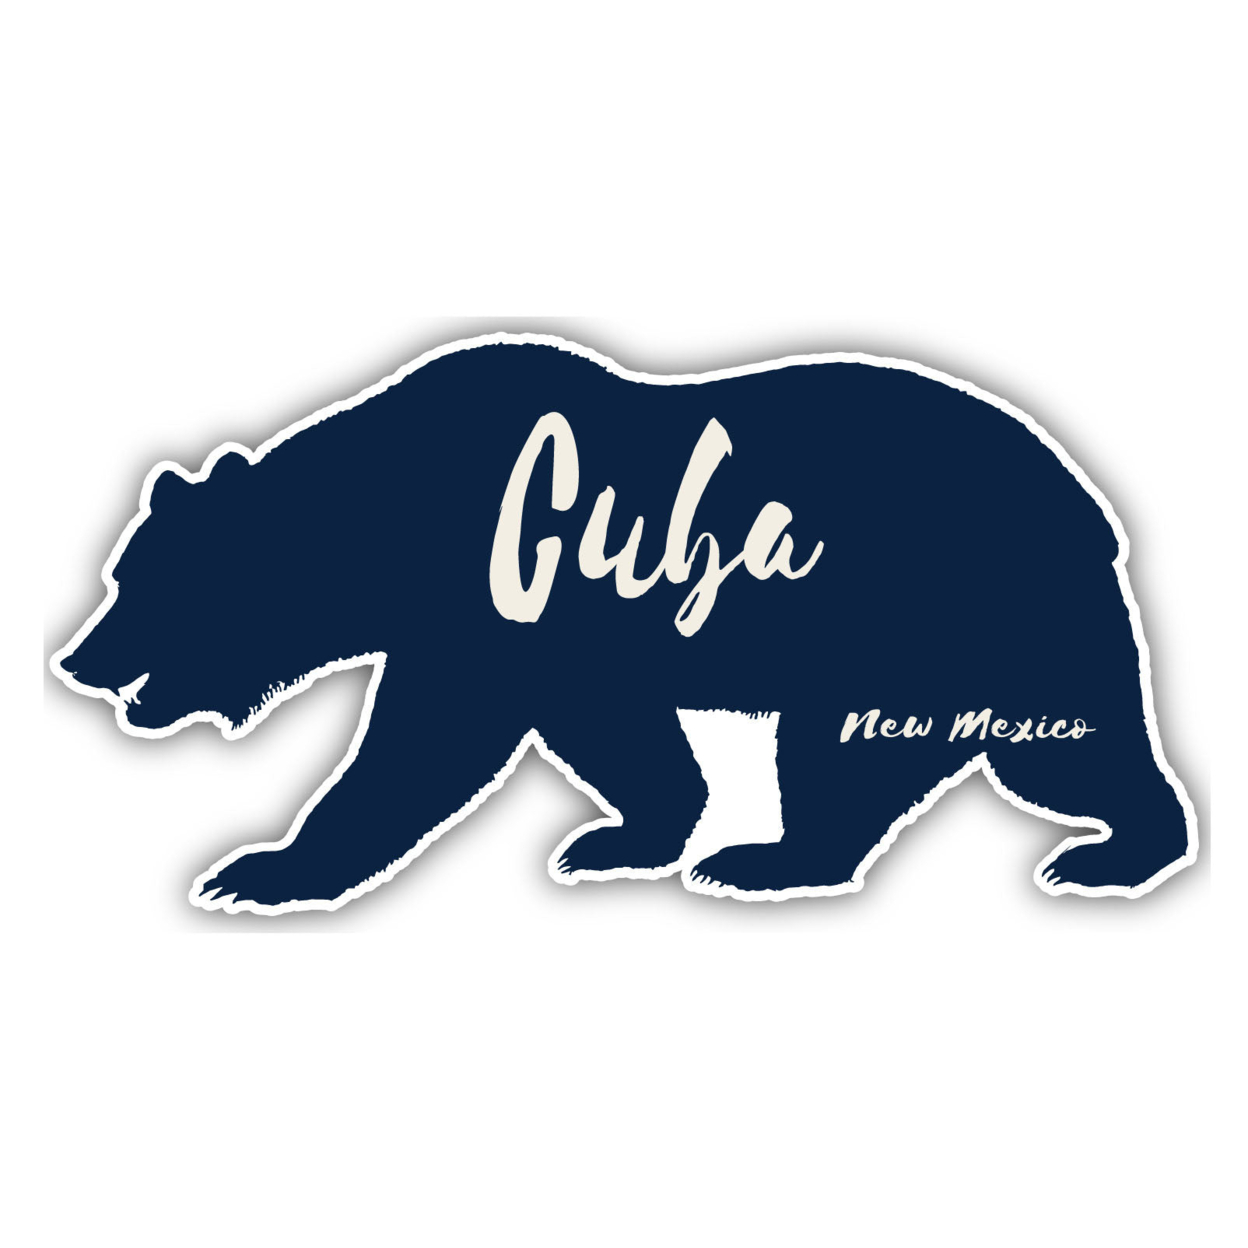 Cuba New Mexico Souvenir Decorative Stickers (Choose Theme And Size) - 4-Pack, 10-Inch, Bear